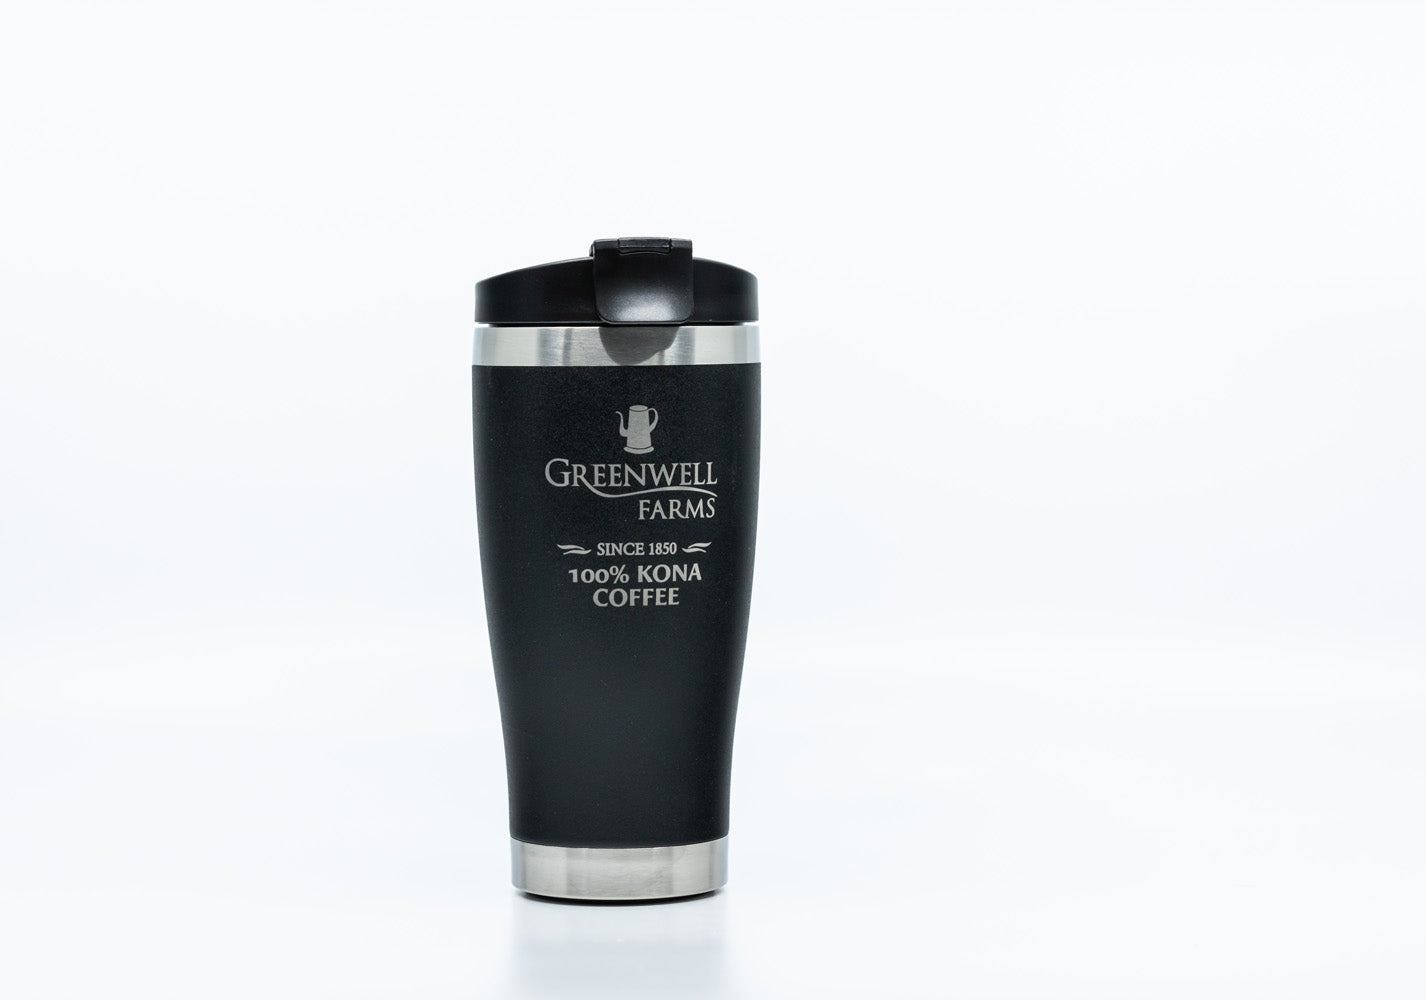 Black Stainless Steel Travel Mug of Greenwell Farms